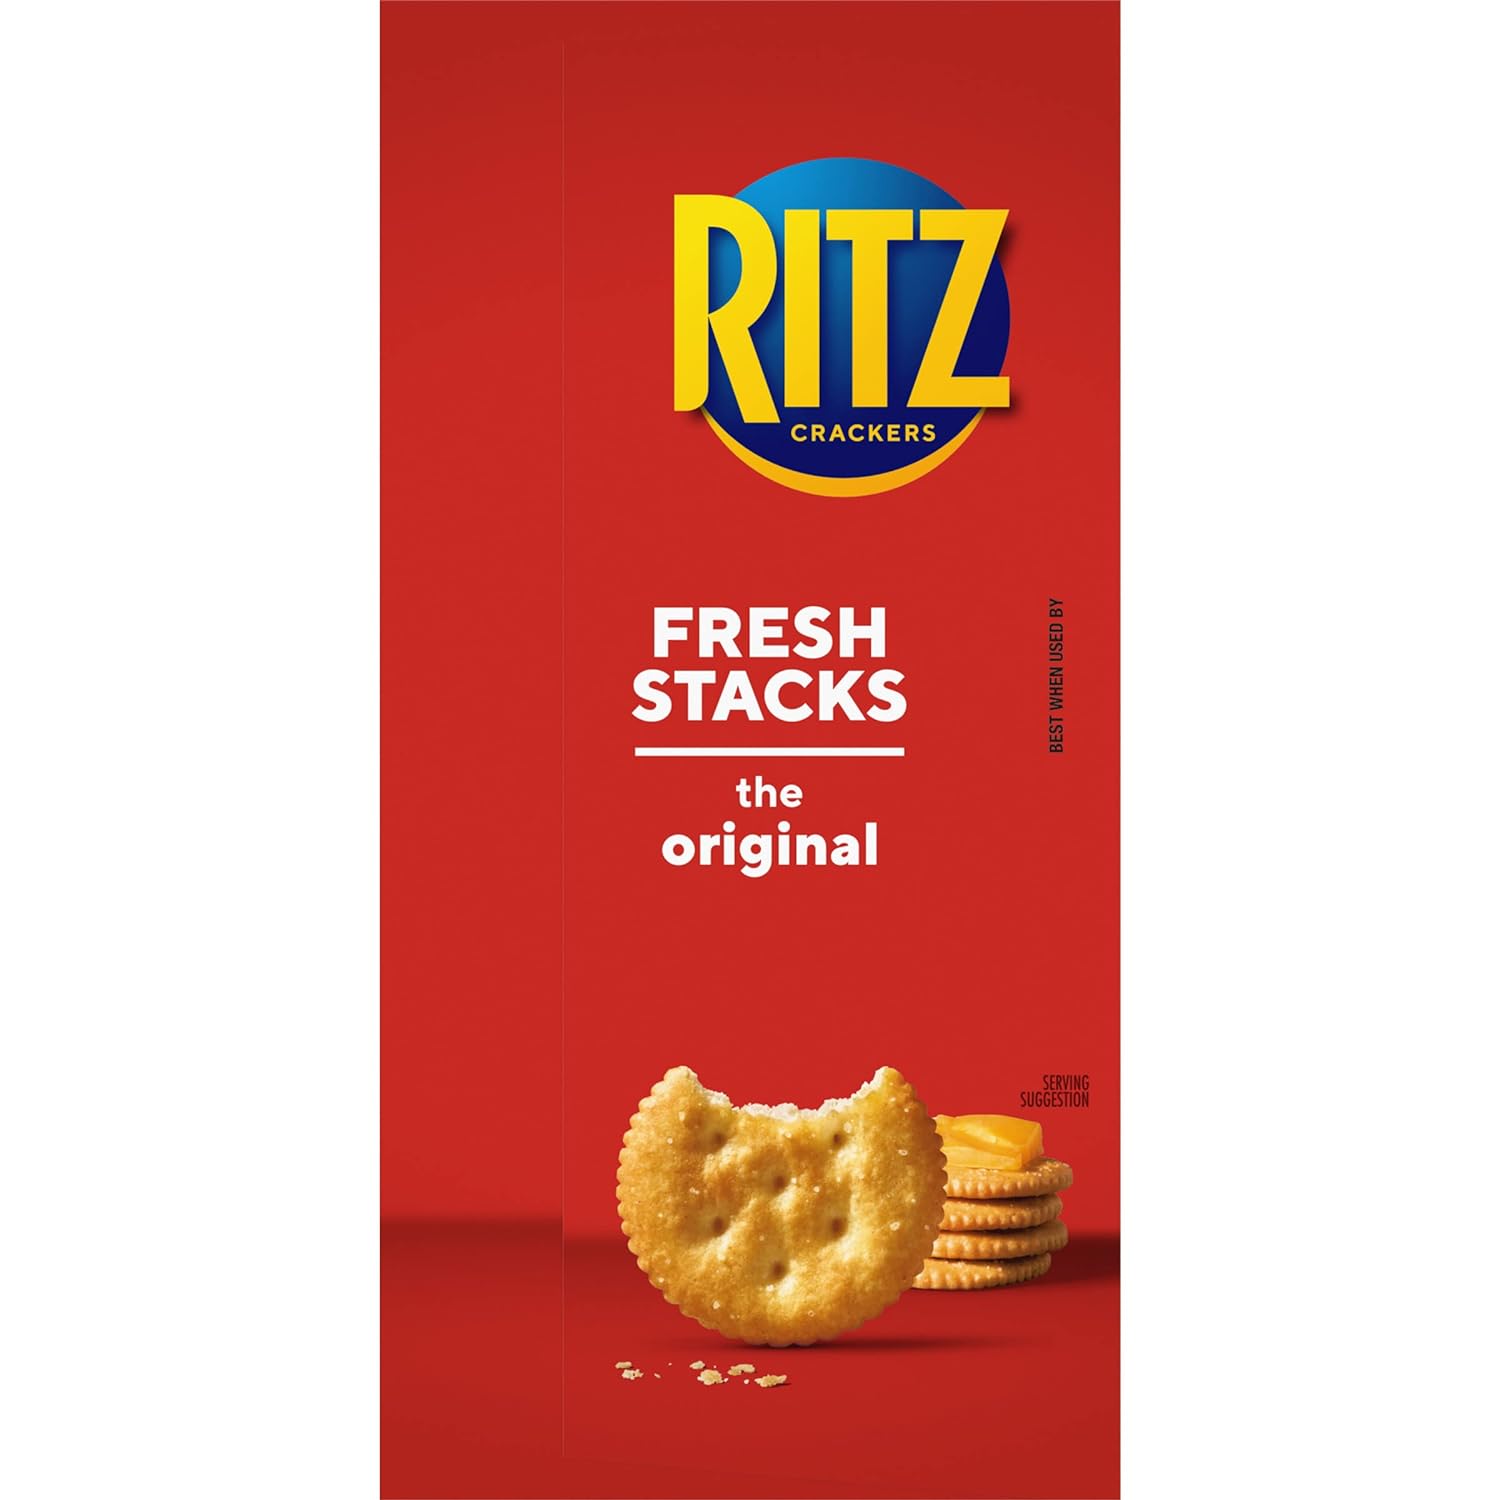 Ritz Crackers Flavor Party Size Box of Fresh Stacks 16 Sleeves Total, original, 23.7 Ounce, 16 count (Pack of 1)